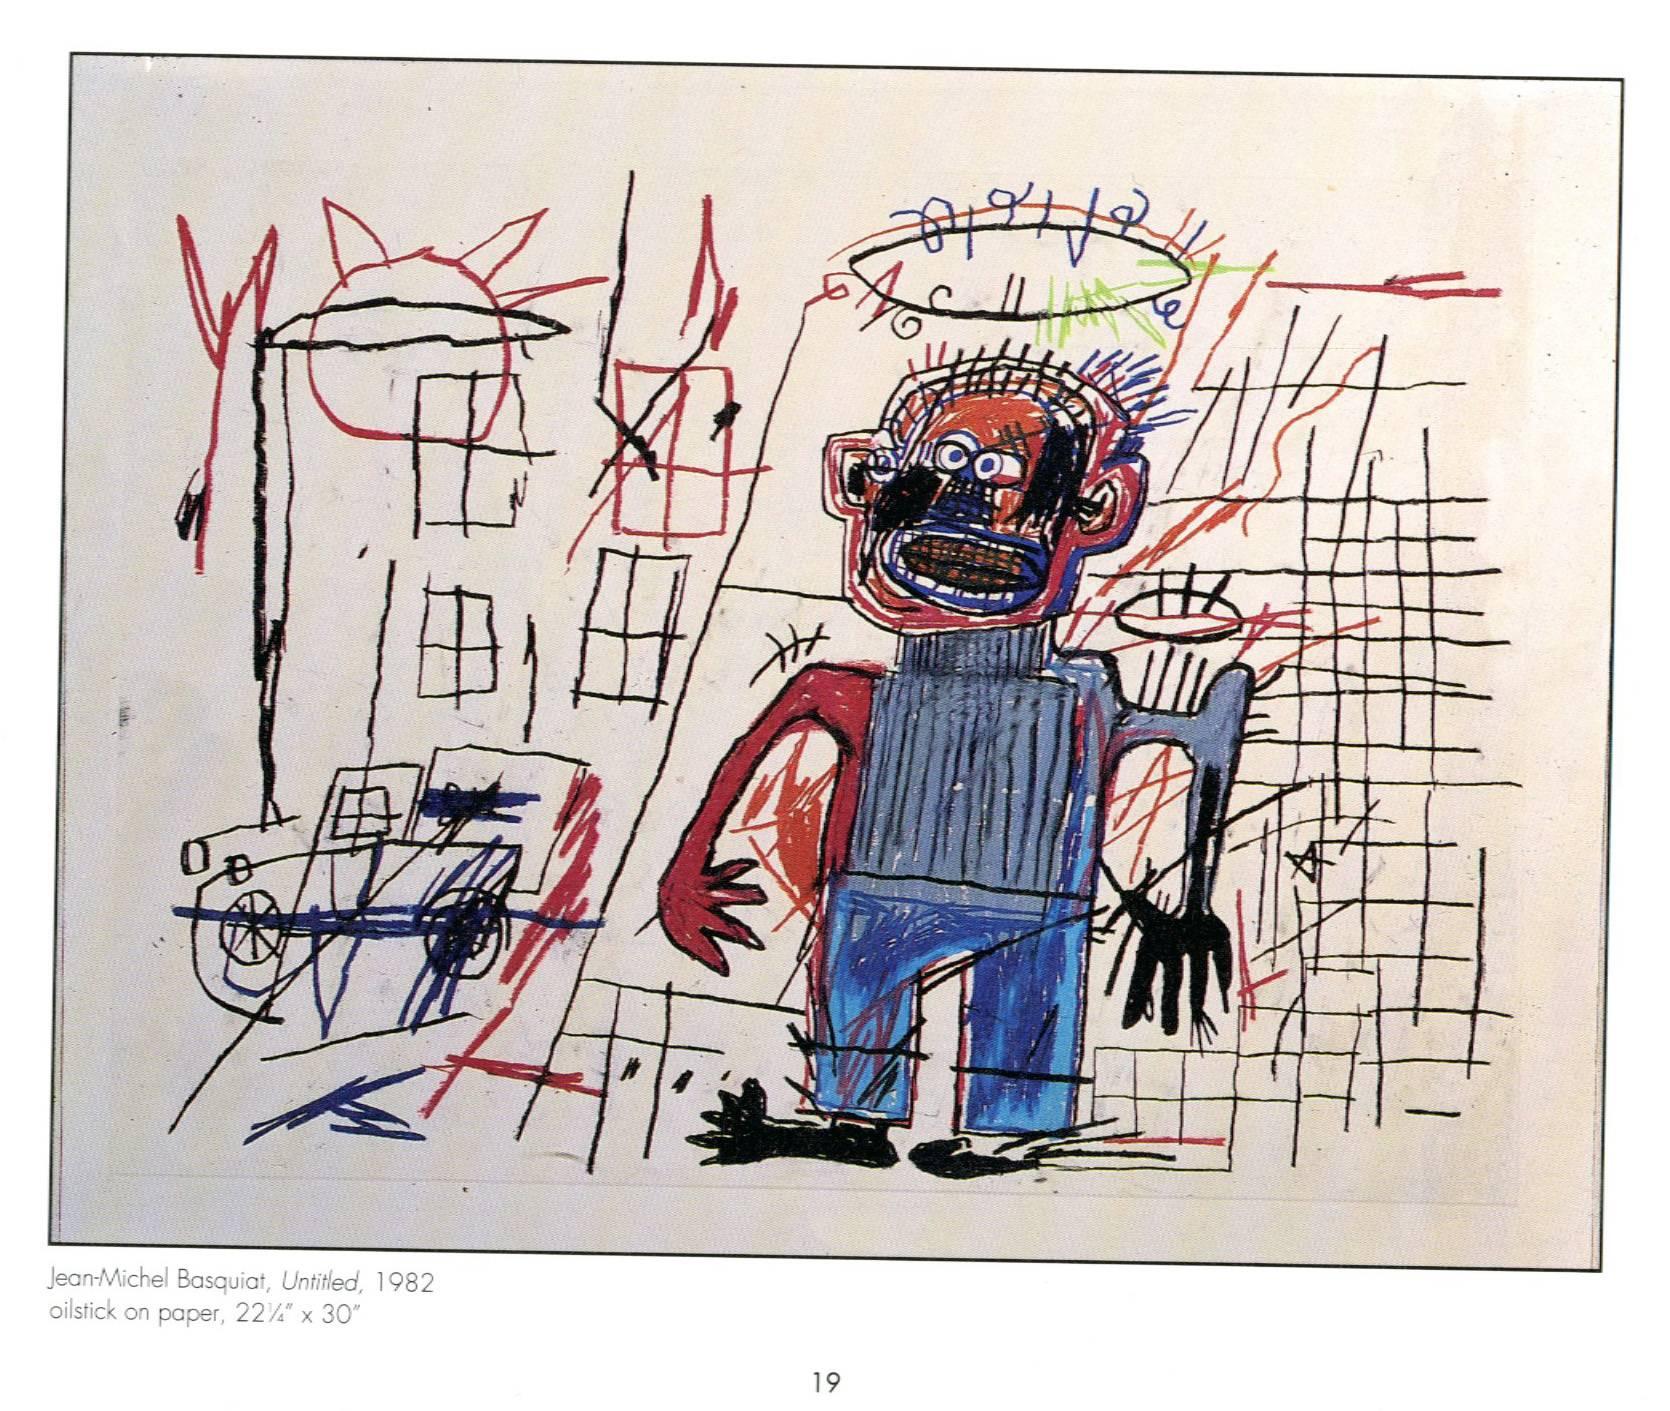 Basquiat Two Cents:
Rare exhibition catalog published in conjunction with the 1995-1996 Basquiat show at Miami-Dade College: Two cents: Works on paper by Jean-Michel Basquiat. First edition. Approximately 40 pages.

Dimensions: 7 x 7 inches. 
Good